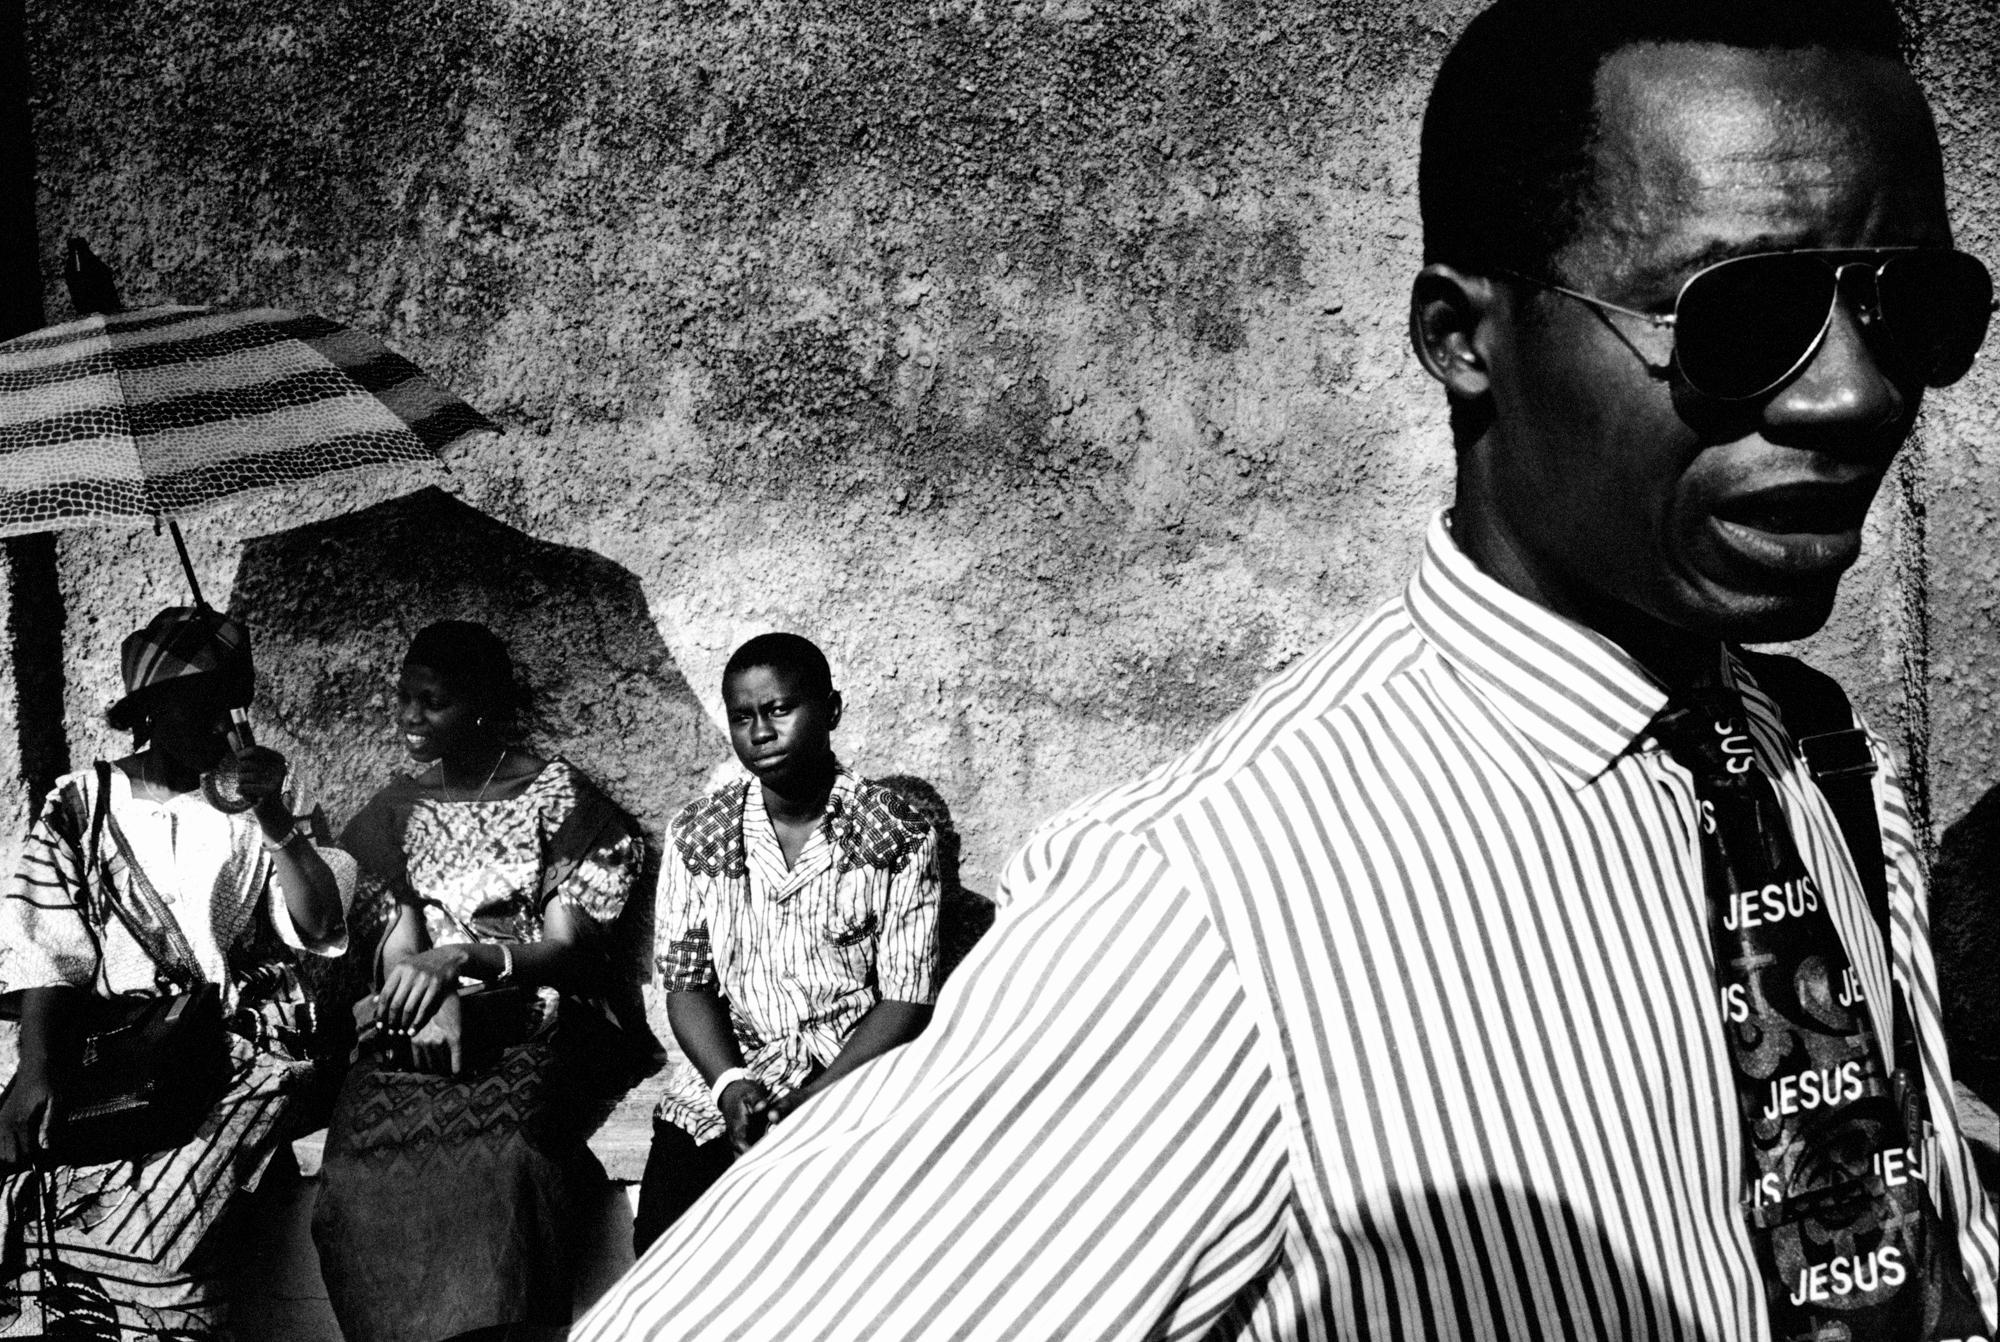 Born again - Sierra Leone, Freetown, May 2002
The Jesus Is Lord...